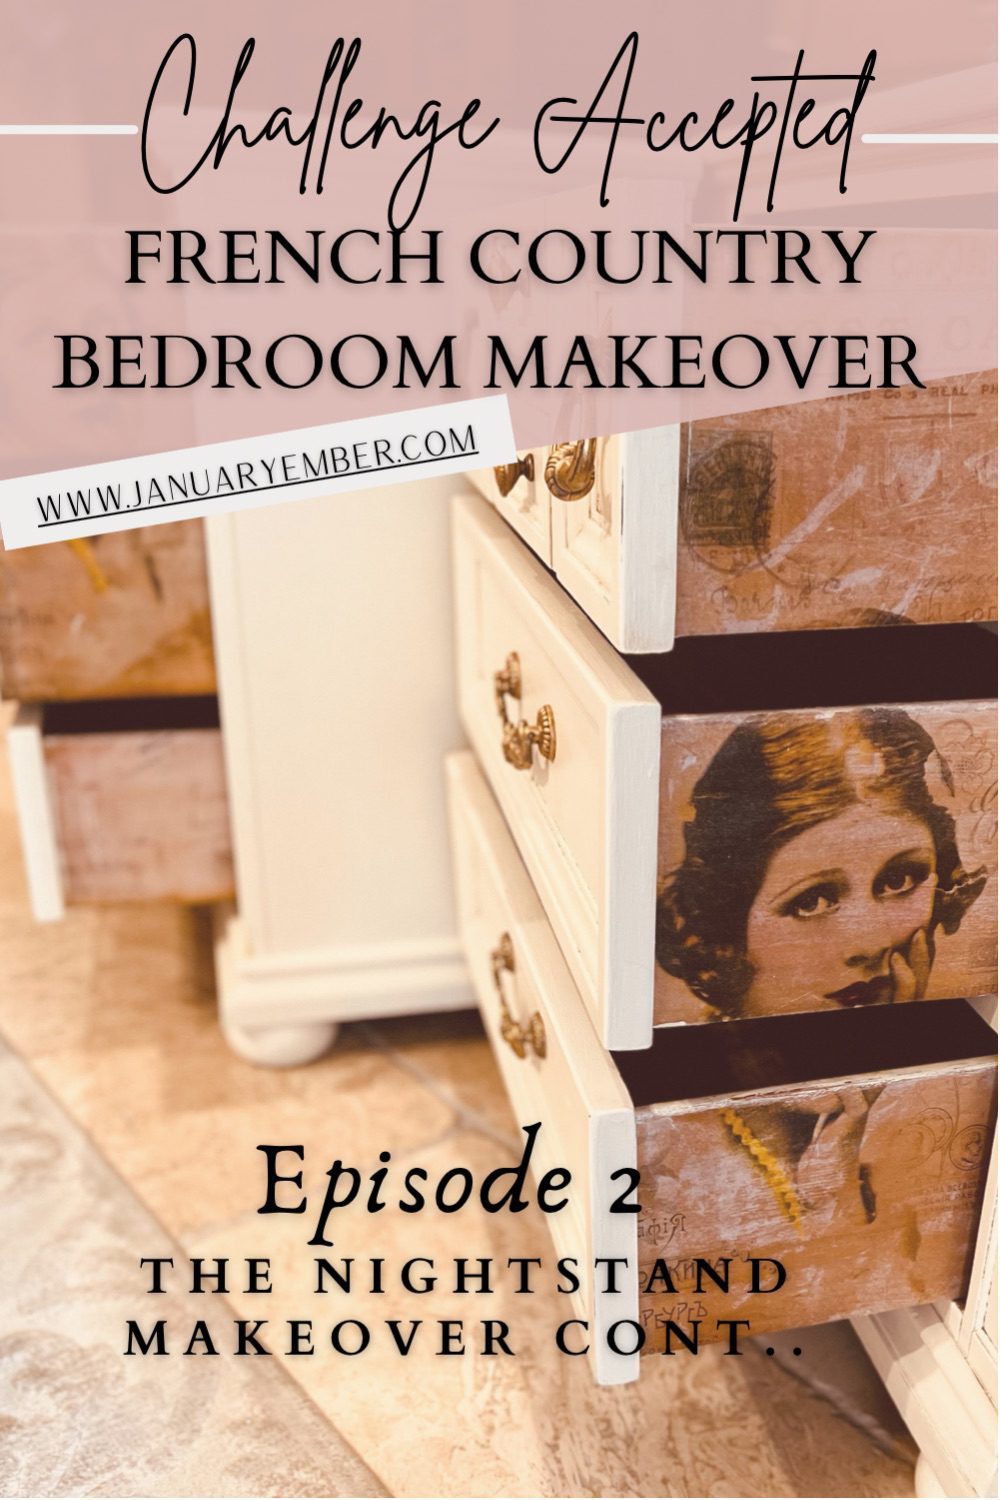 Episode 2 - Decoupage on the drawer sides